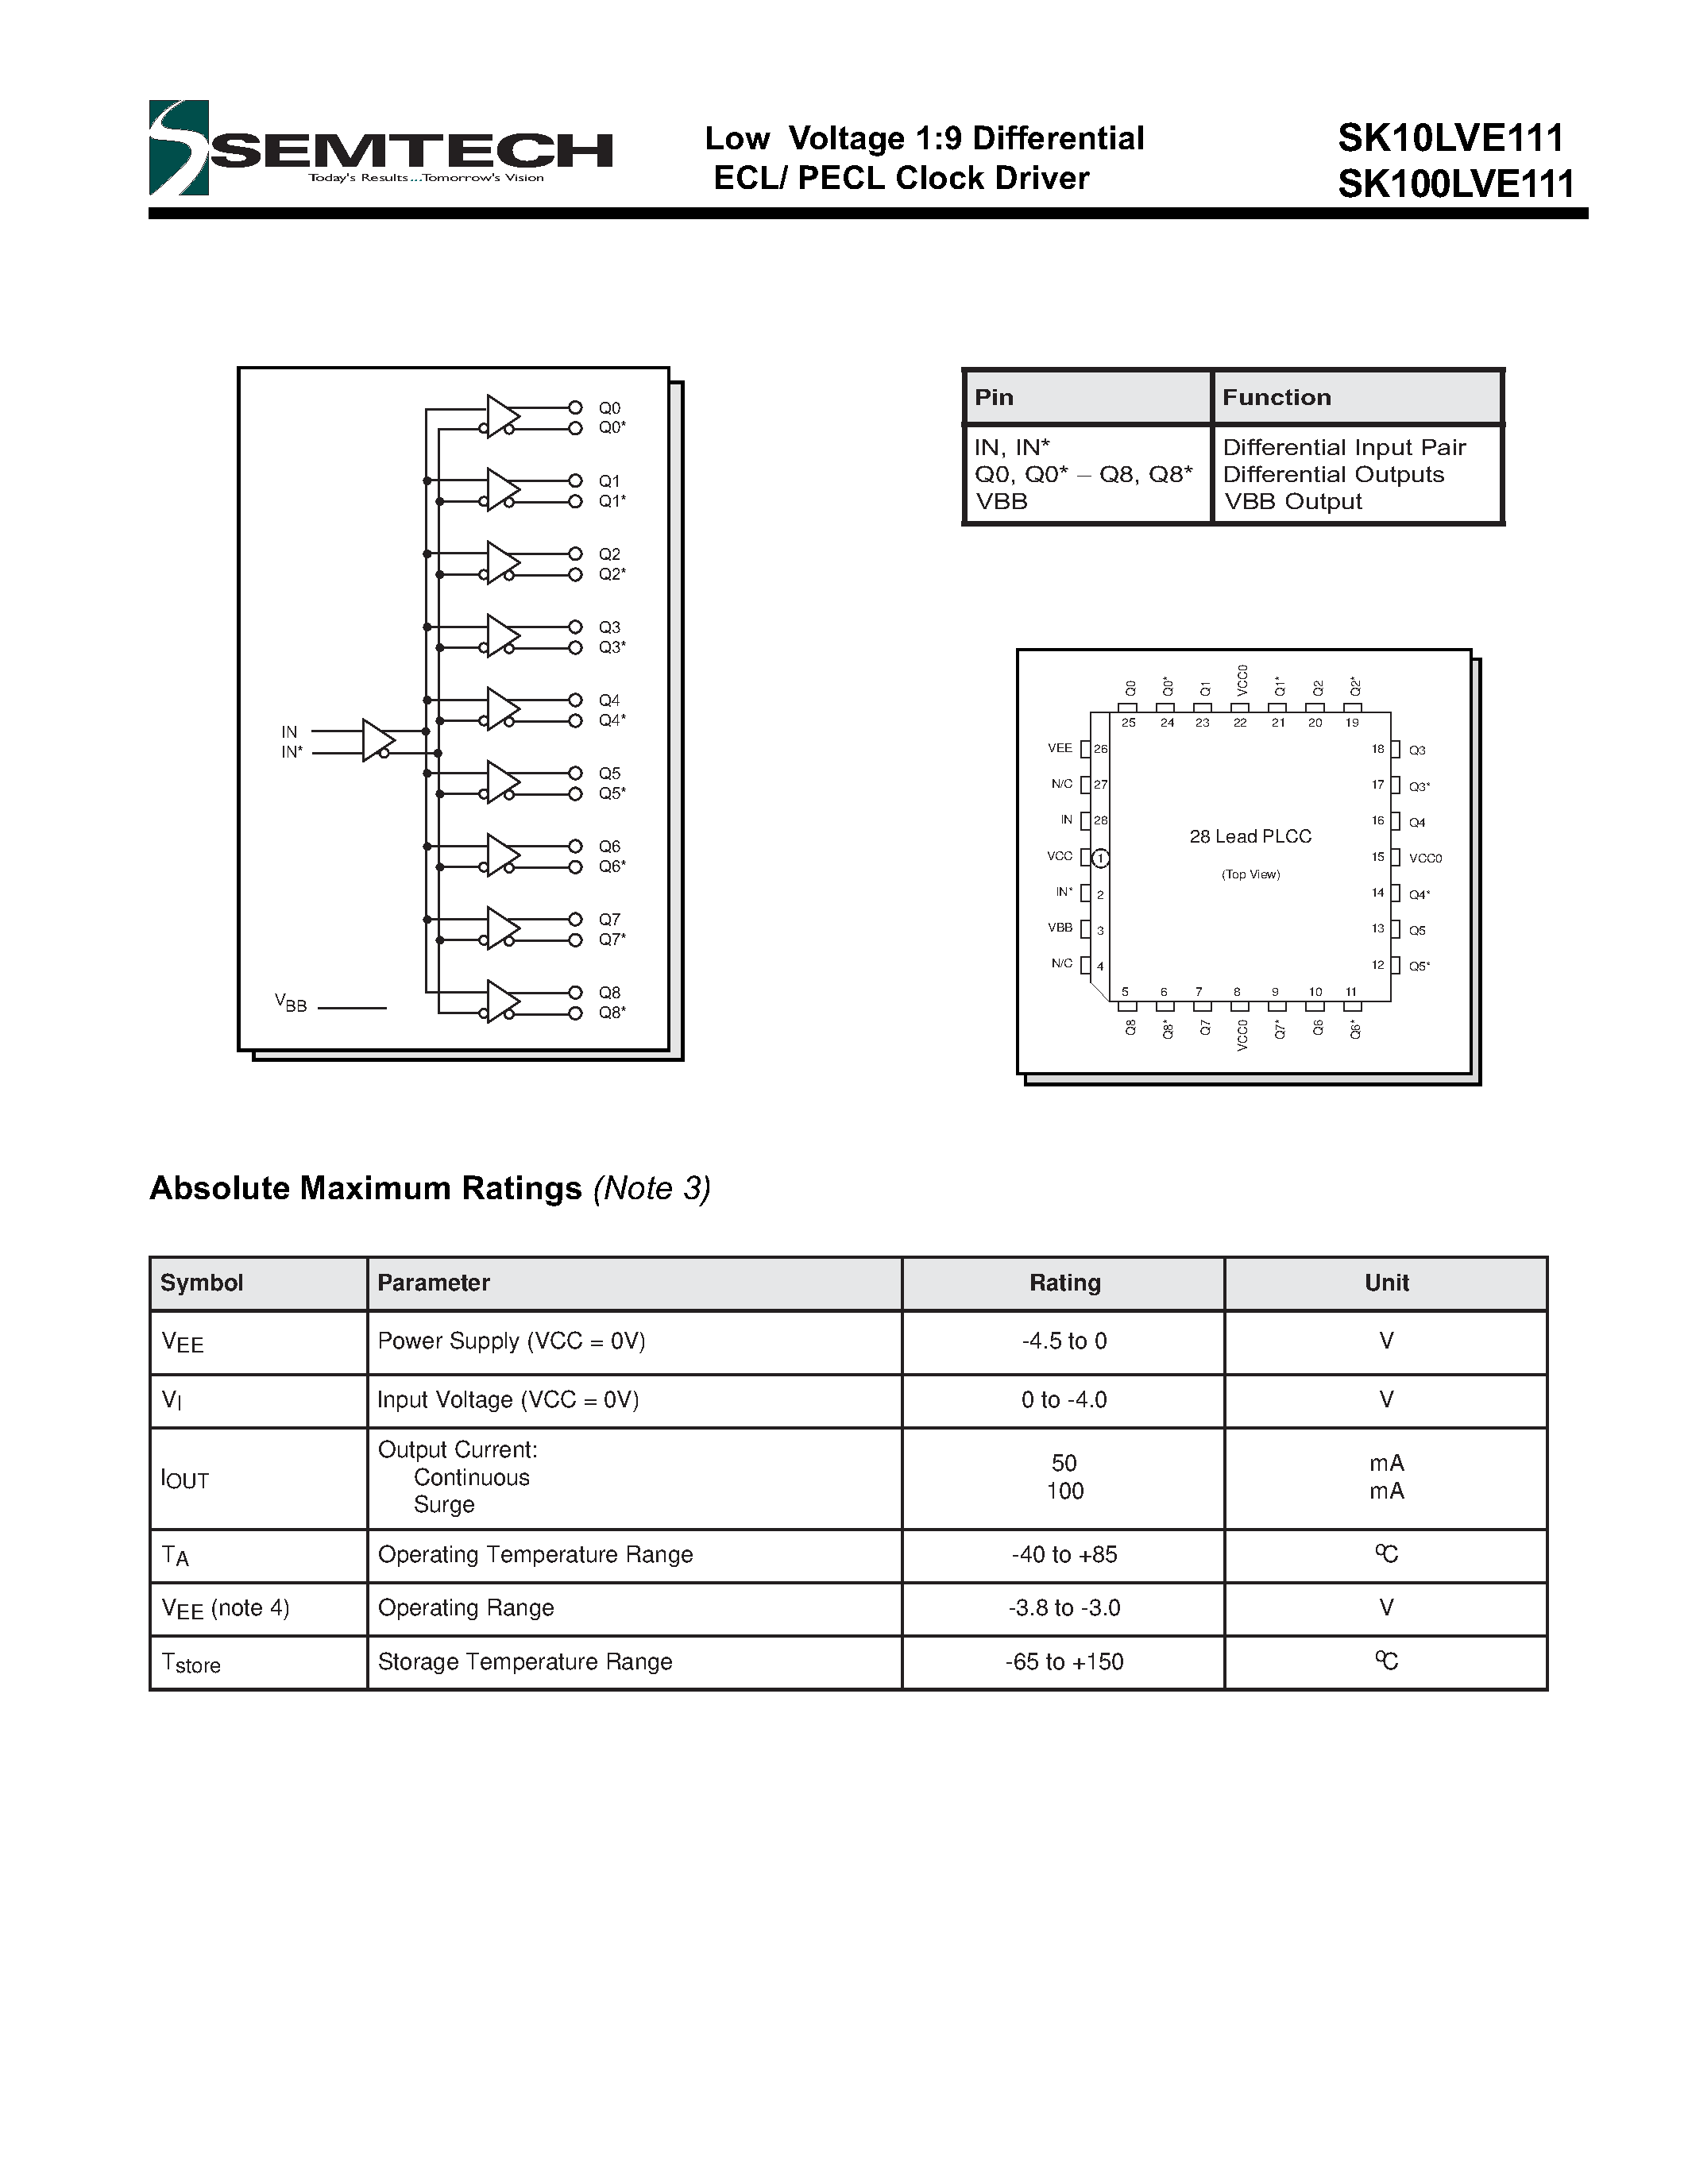 Datasheet SK10LVE111 - Low Voltage 1:9 Differential ECL/ PECL Clock Driver page 2